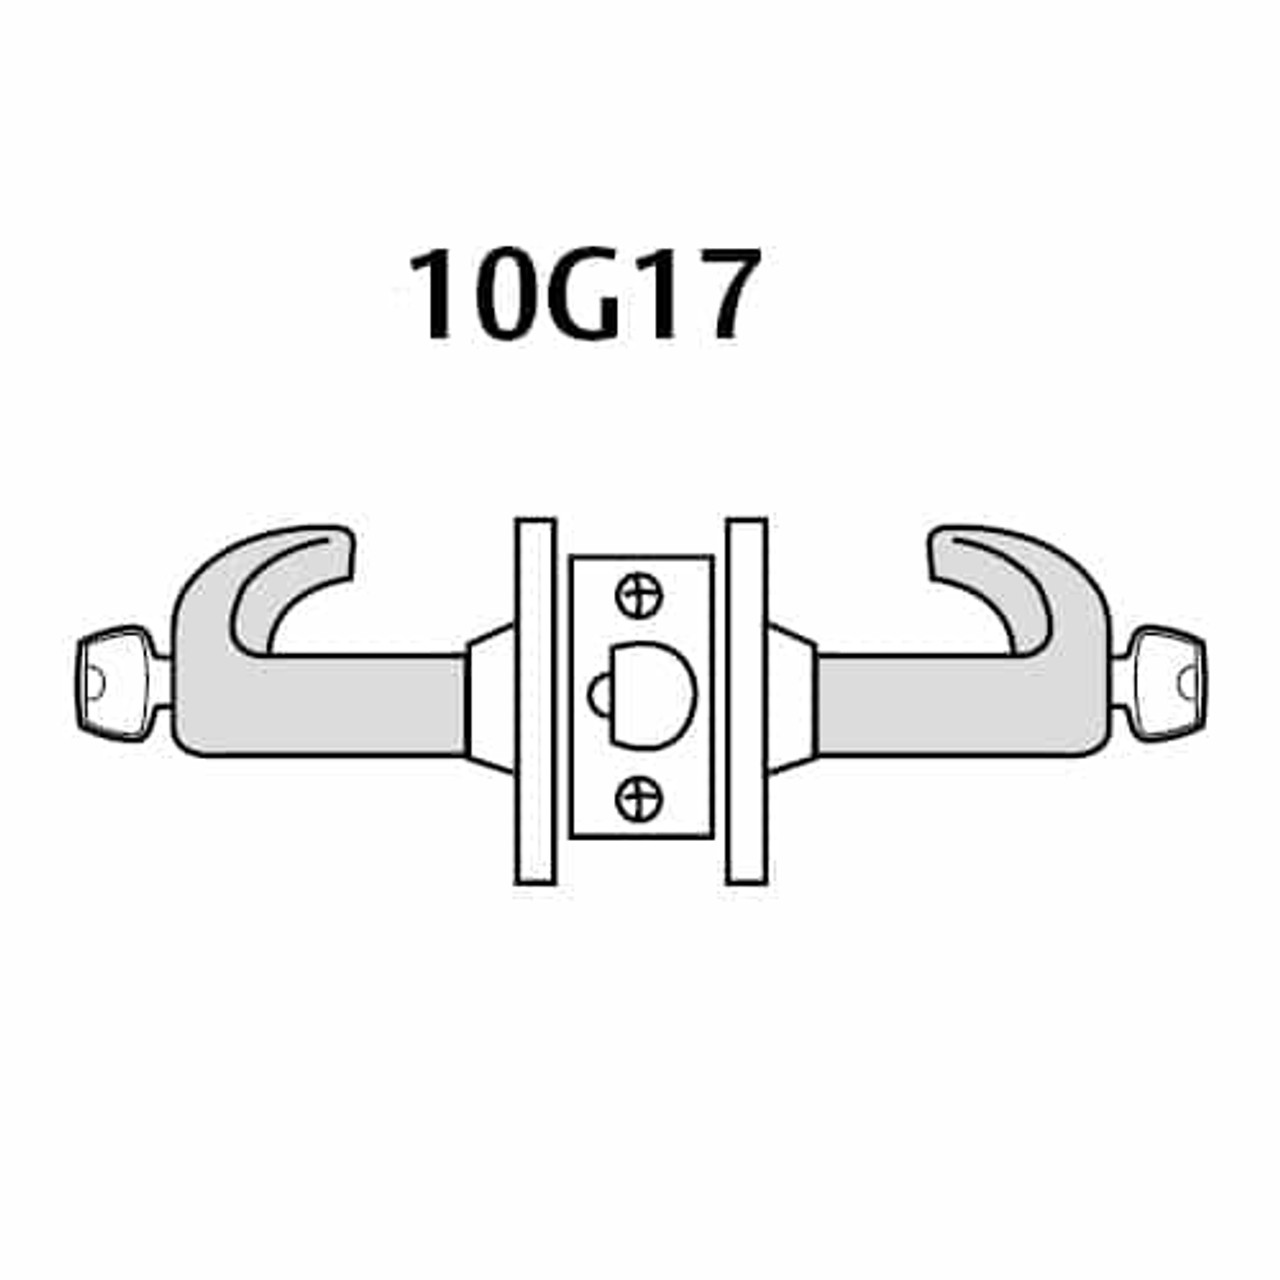 2860-10G17-GL-10B Sargent 10 Line Cylindrical Institutional Locks with L Lever Design and G Rose Prepped for LFIC in Oxidized Dull Bronze